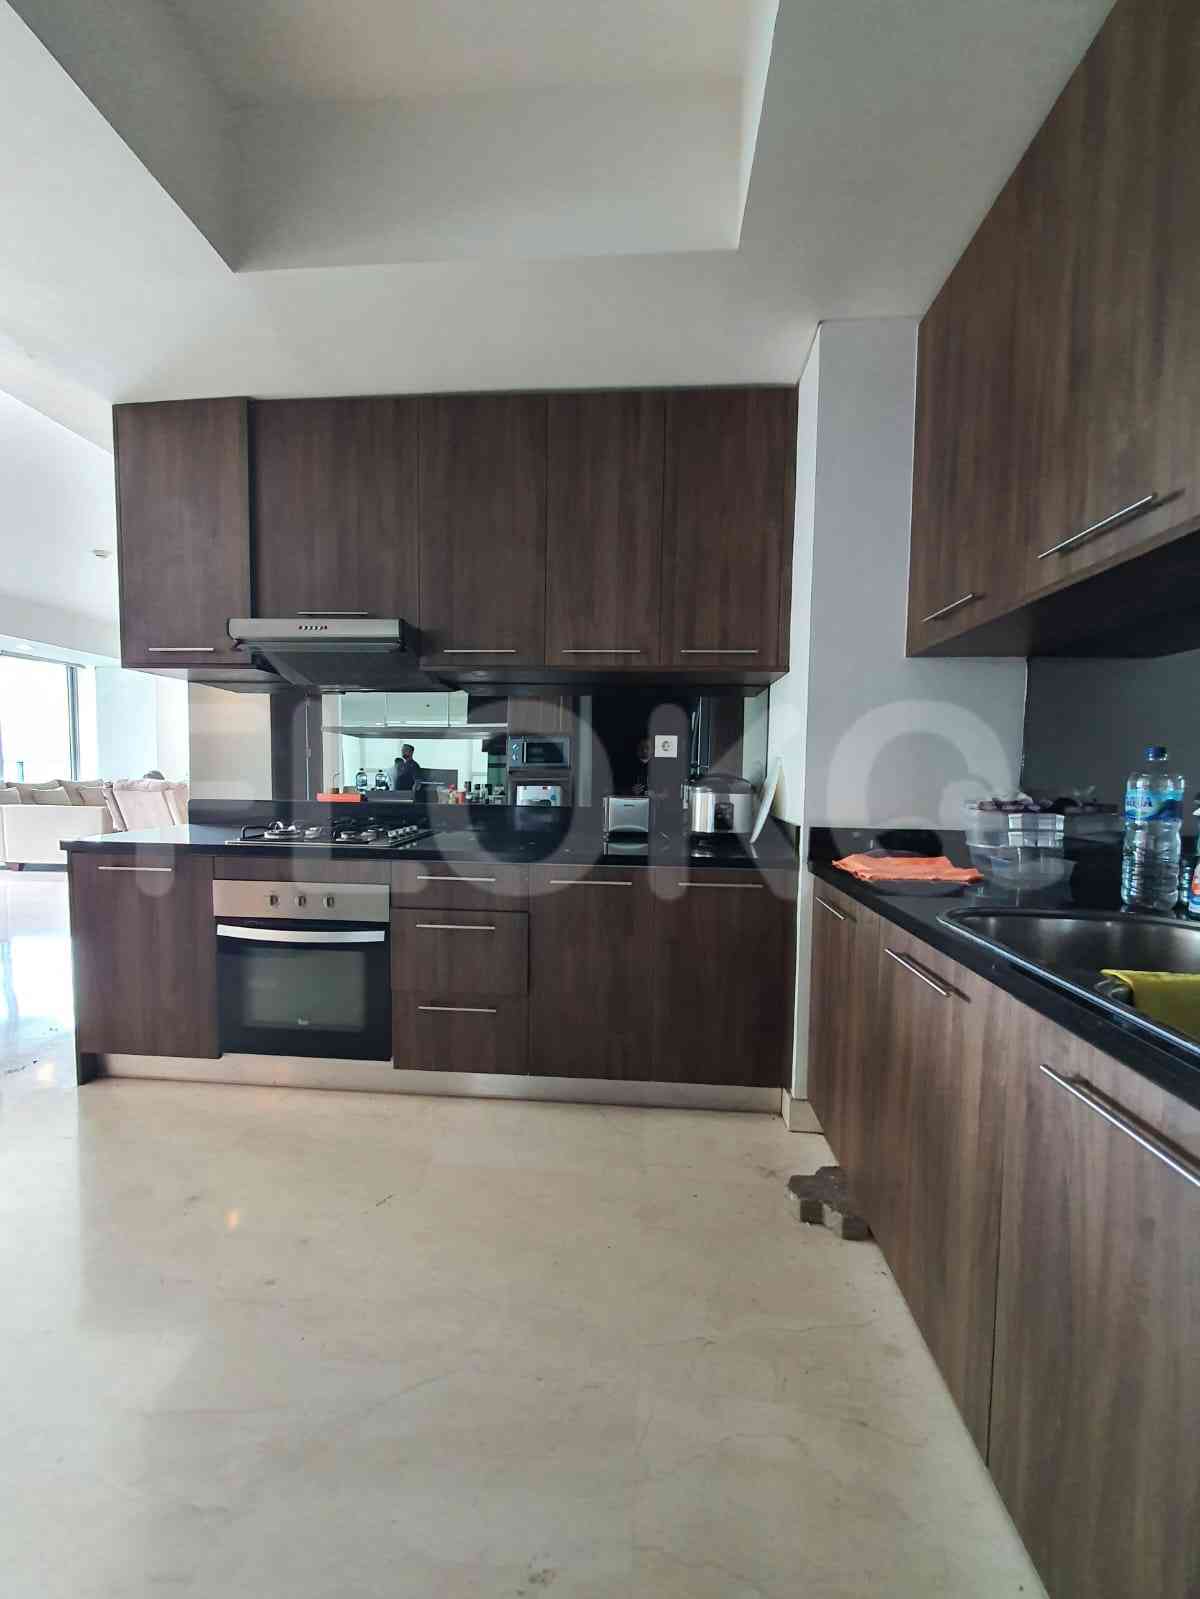 3 Bedroom on 15th Floor for Rent in Kemang Village Residence - fked84 5